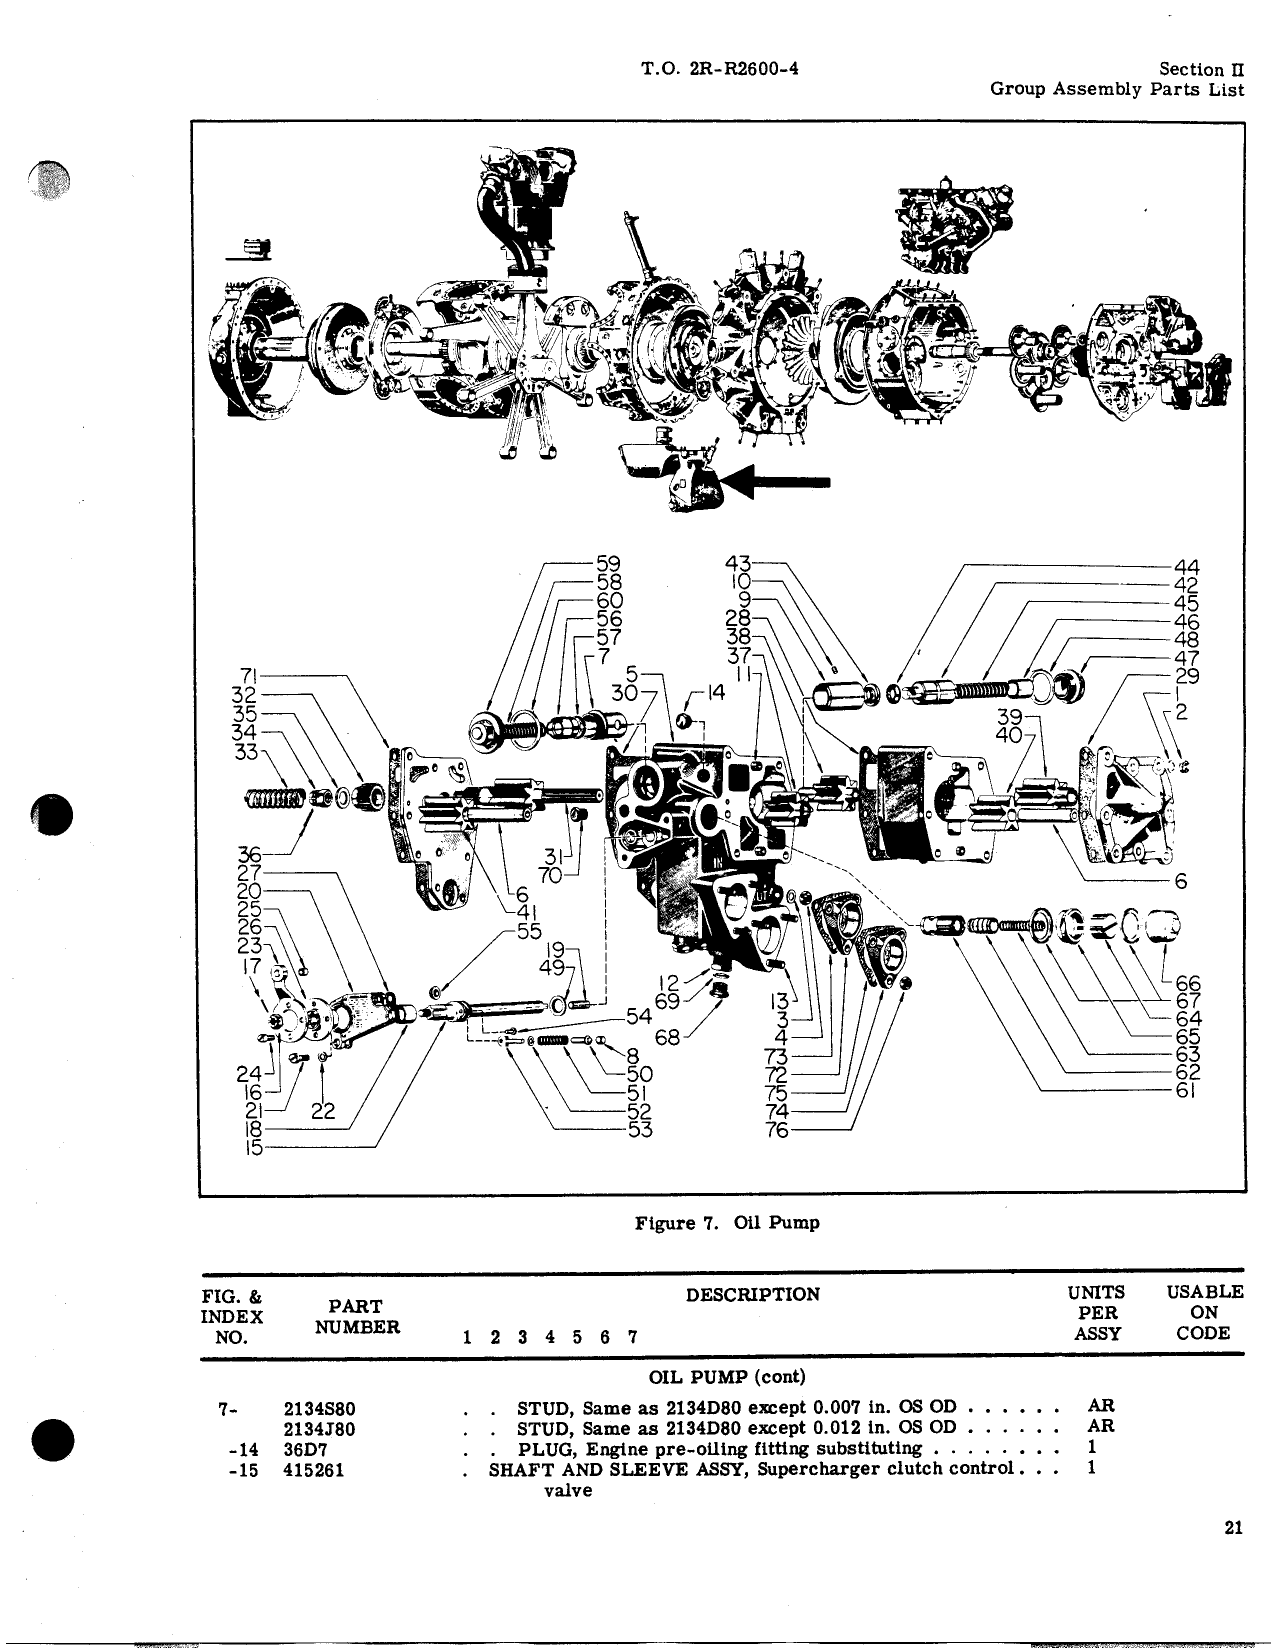 Sample page 25 from AirCorps Library document: Illustrated Parts Manual - R-2600 (-29A, -35)